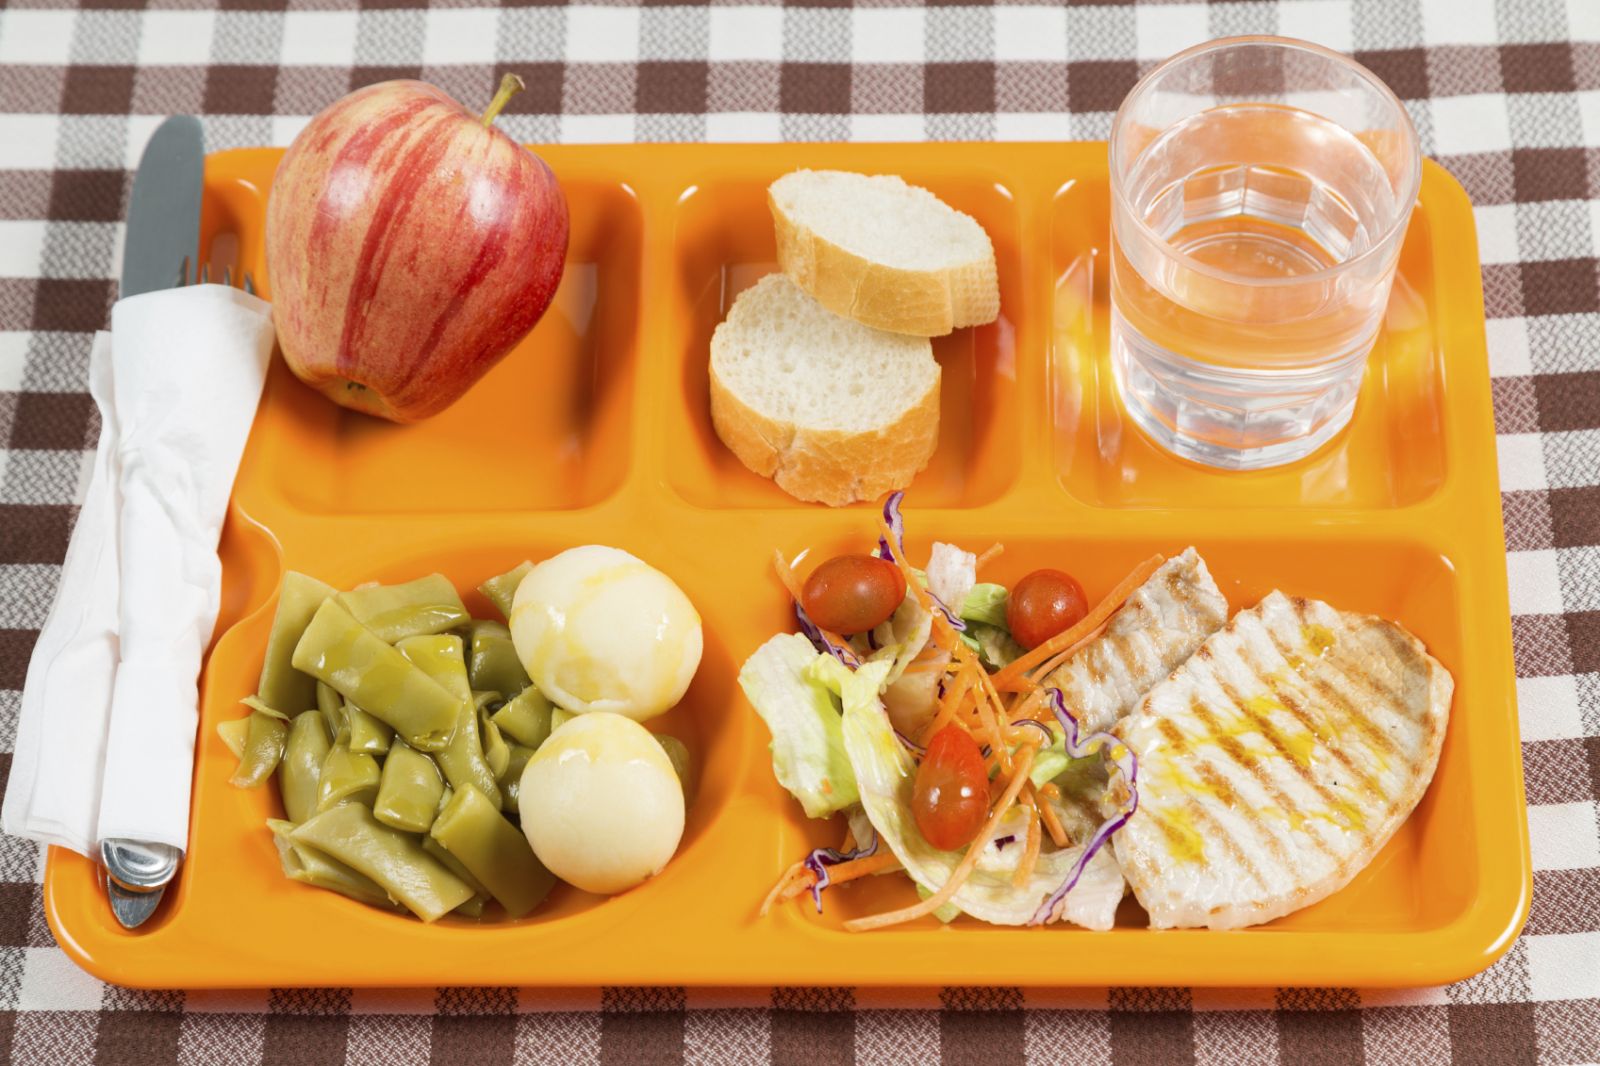 Healthy Lunch Ideas For School Cafeteria - BEST HOME DESIGN IDEAS